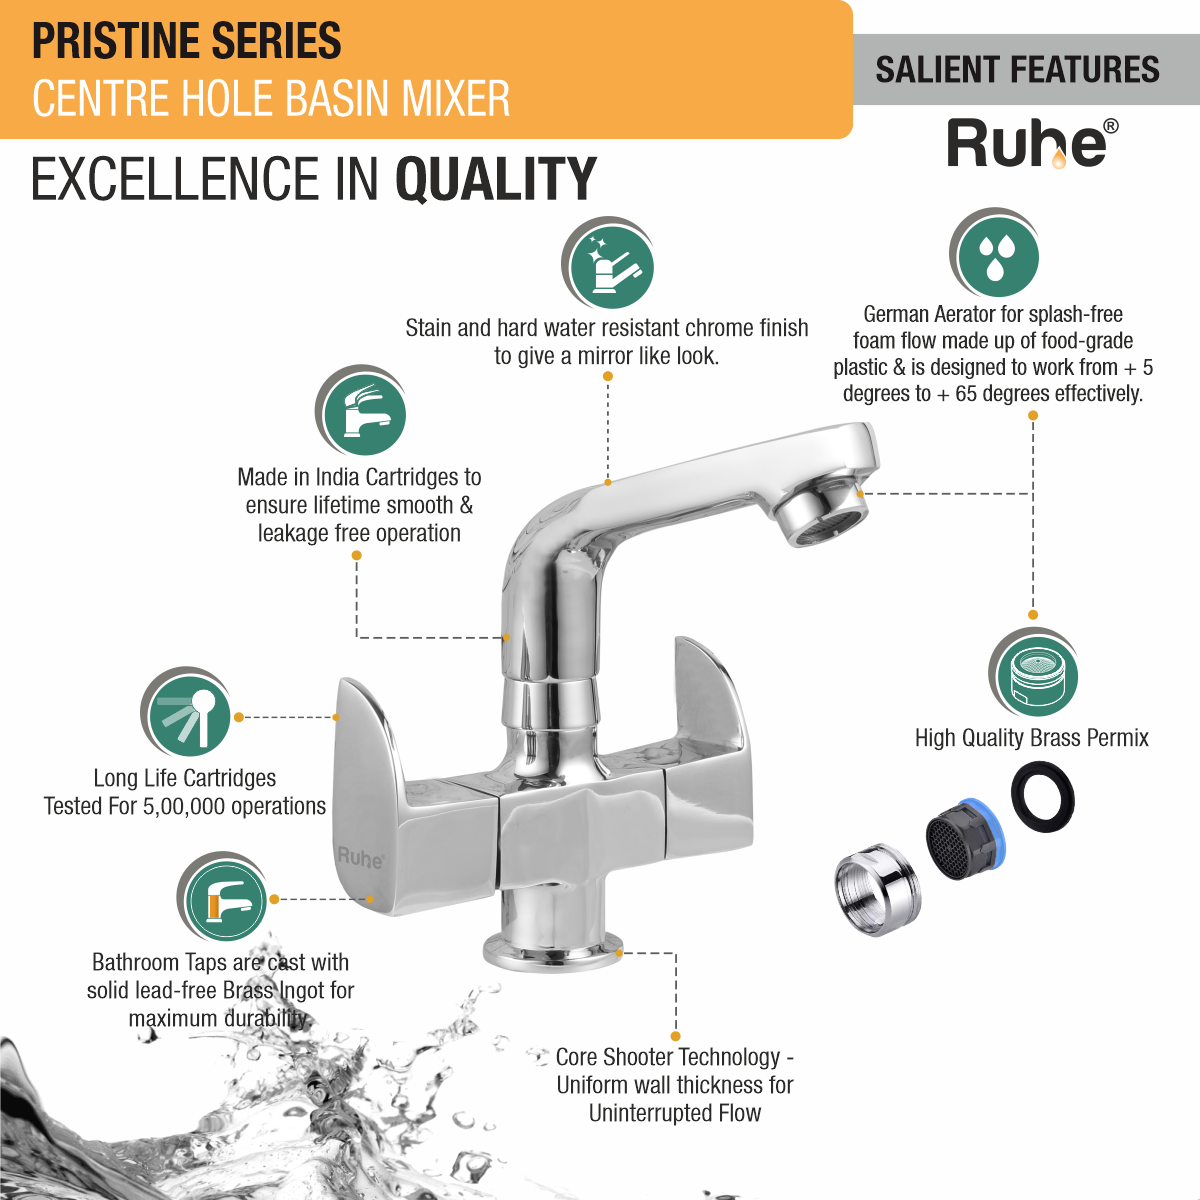 Pristine Centre Hole Basin Mixer with Small (7 inches) Swivel Spout Faucet features